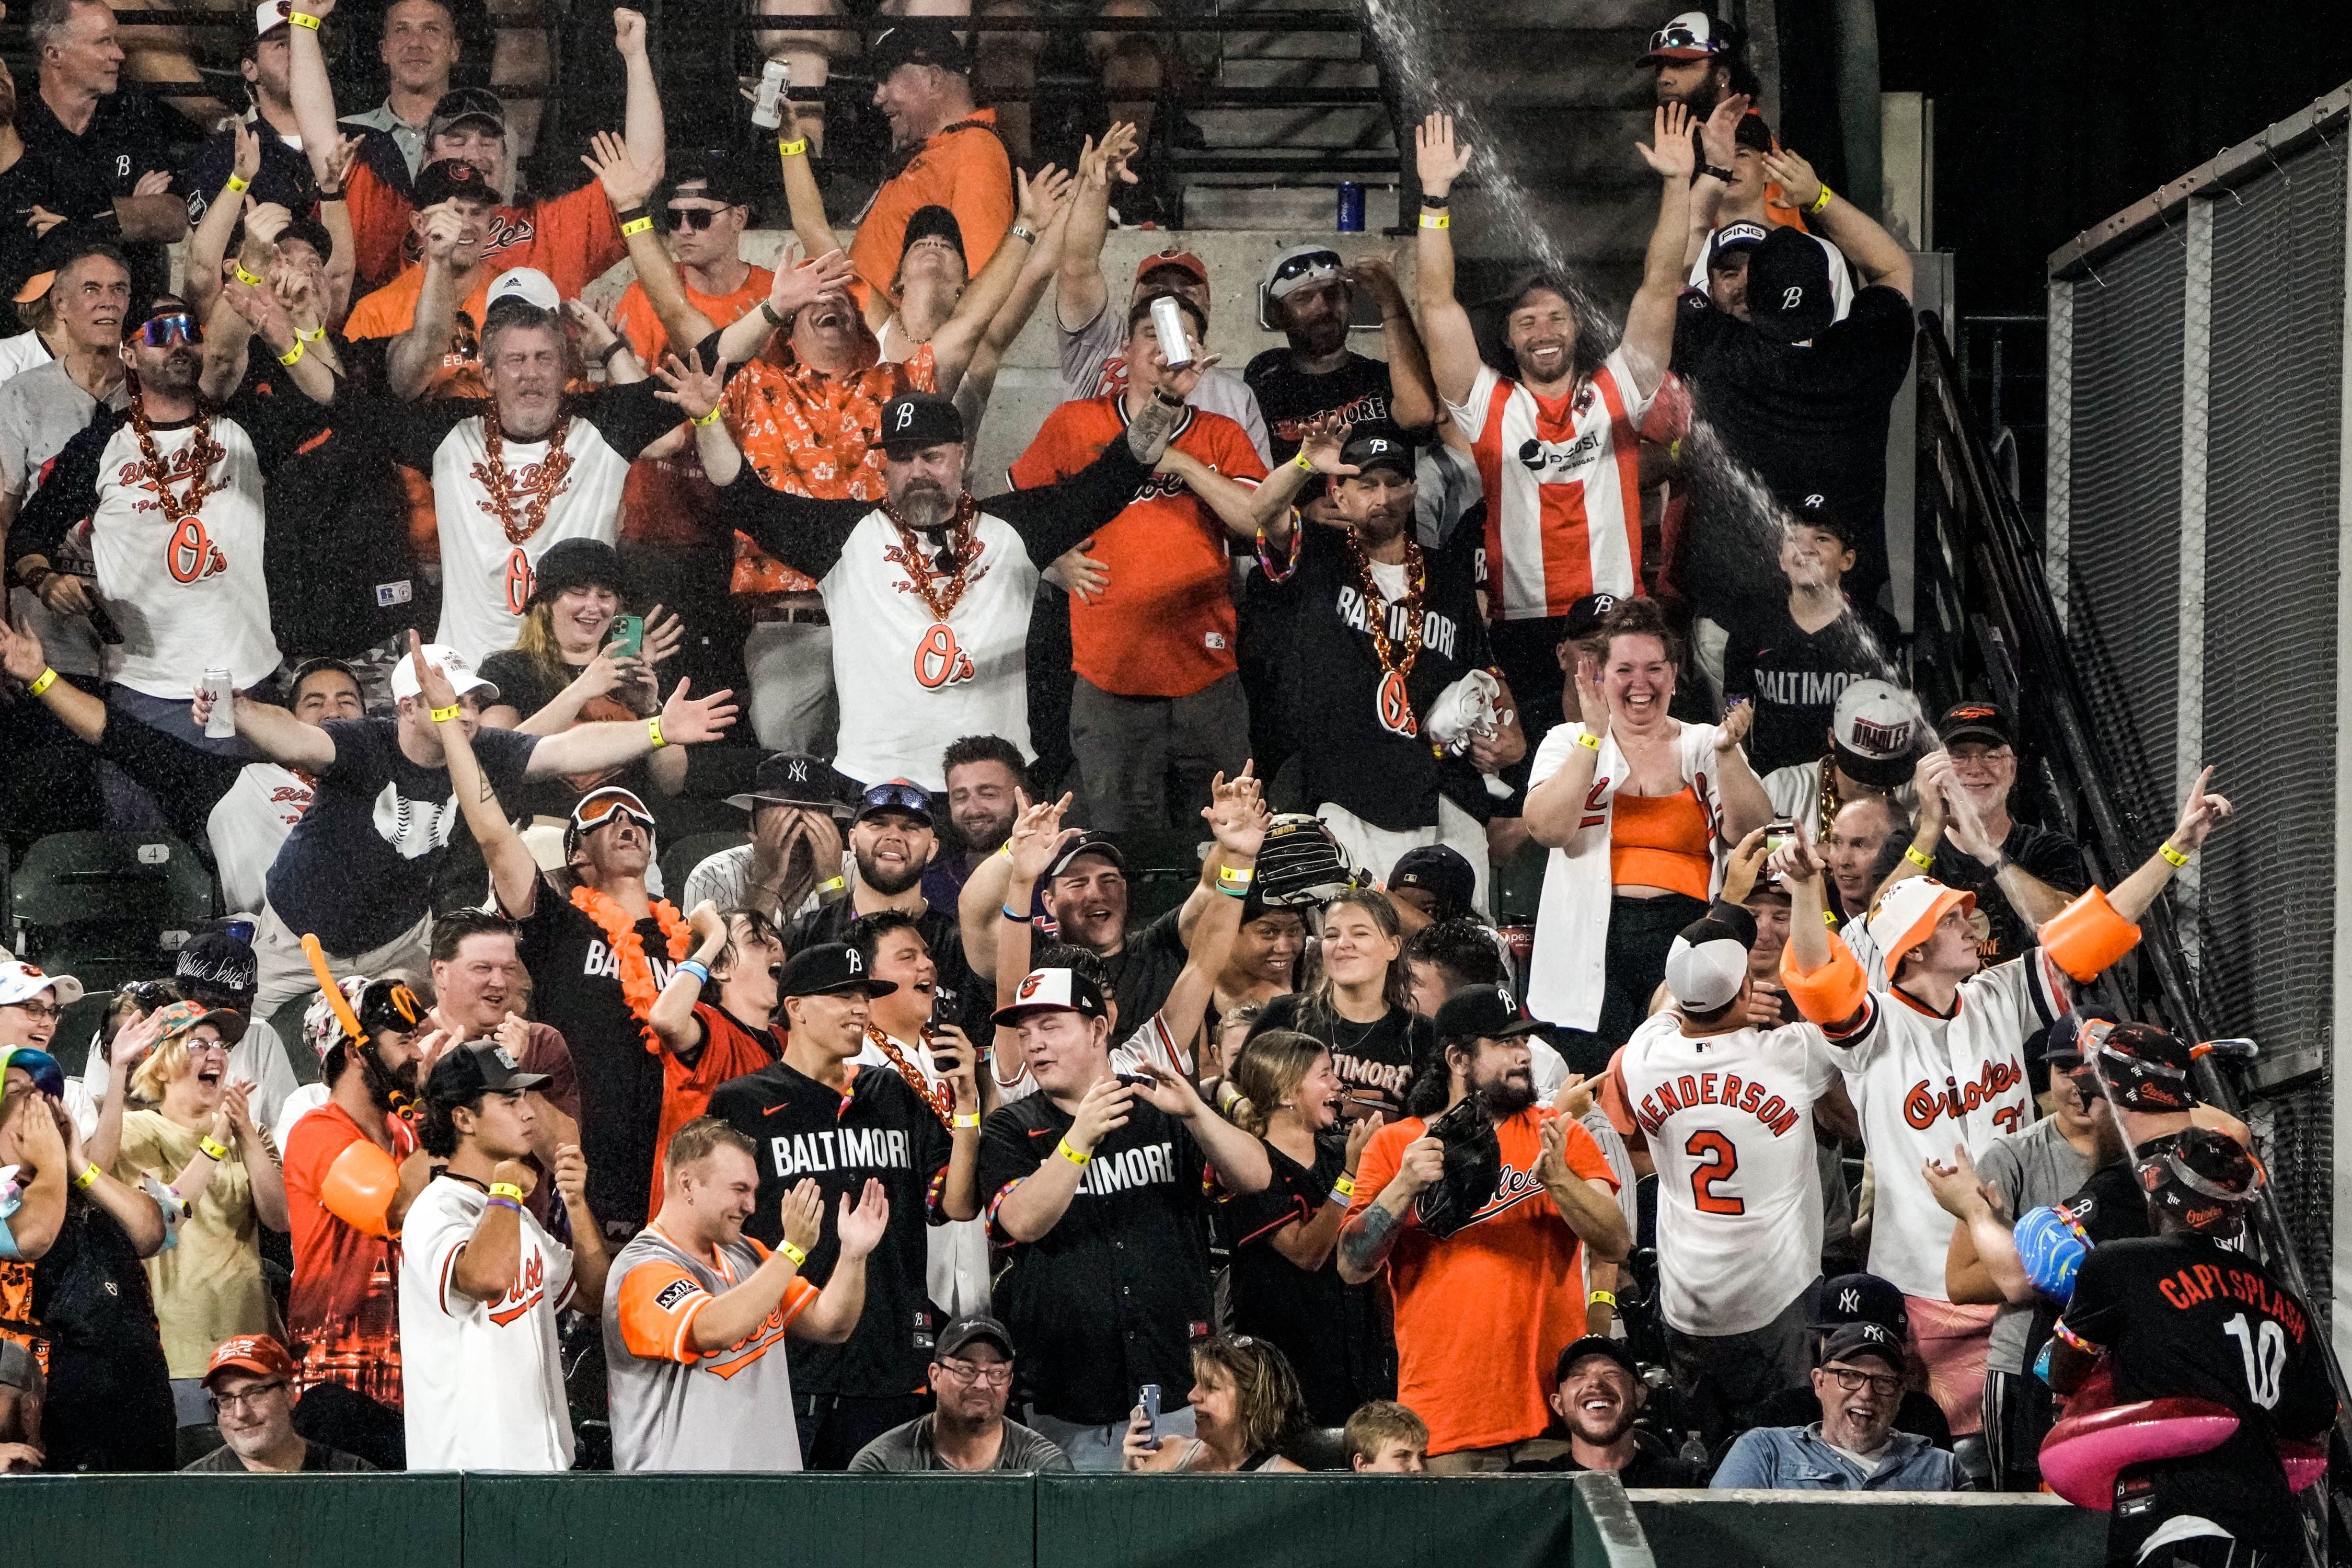 Maryland Gov. Wes Moore to be Orioles' guest splasher Sunday night